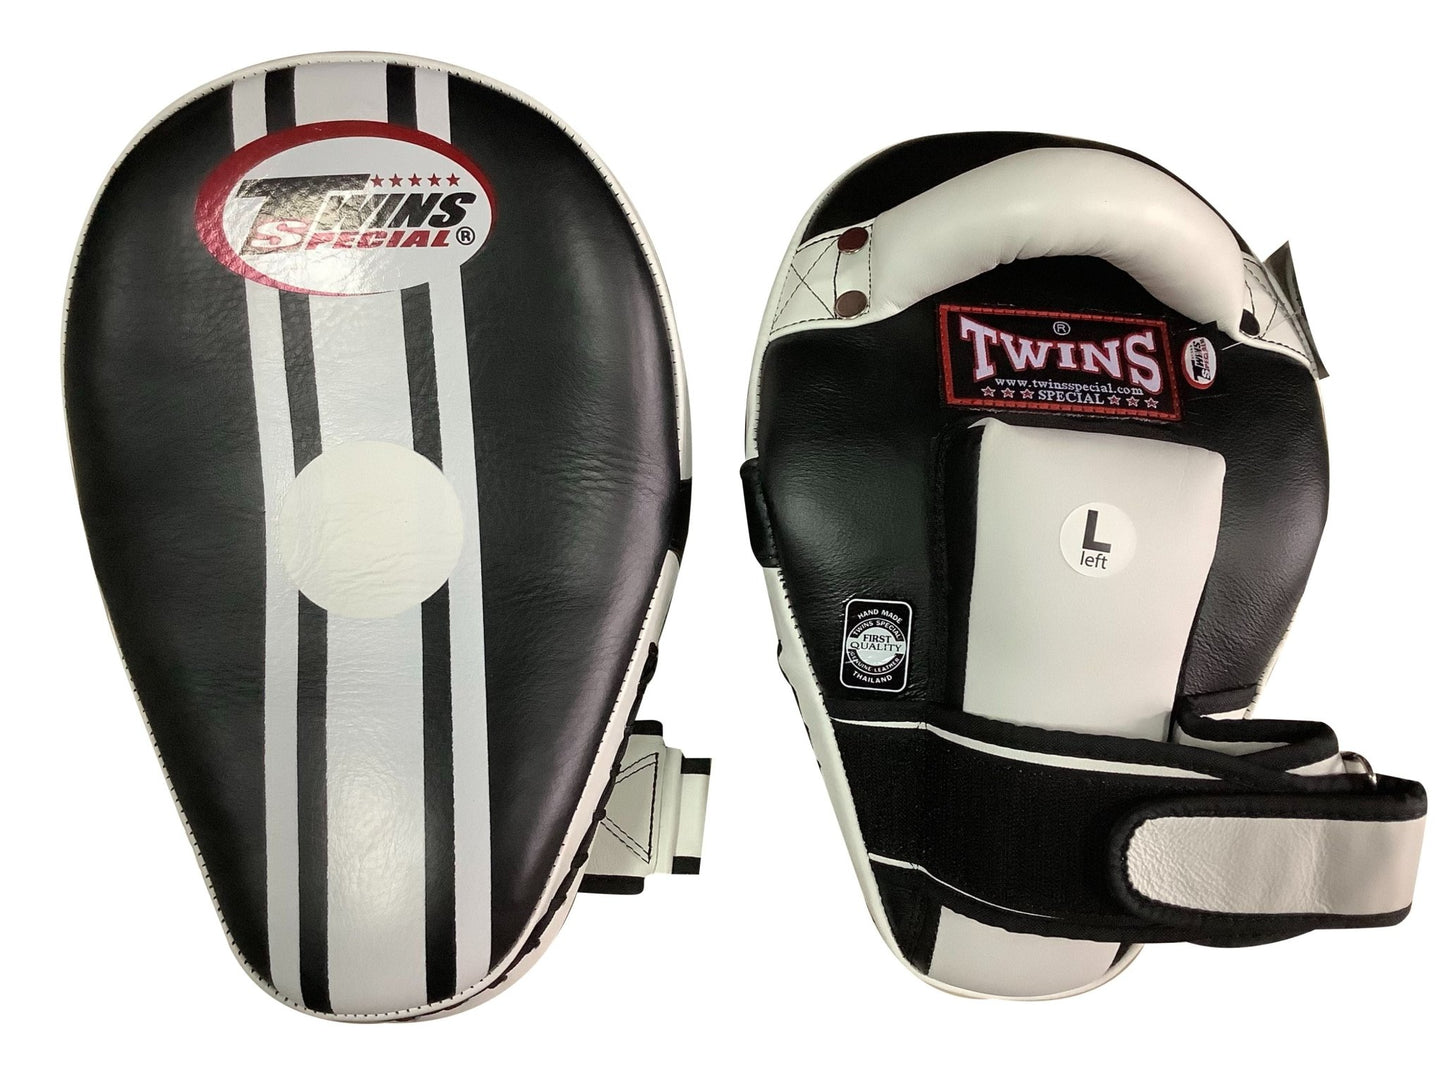 Twins Special Kicking Pads KPL11 White/black (color reverse)